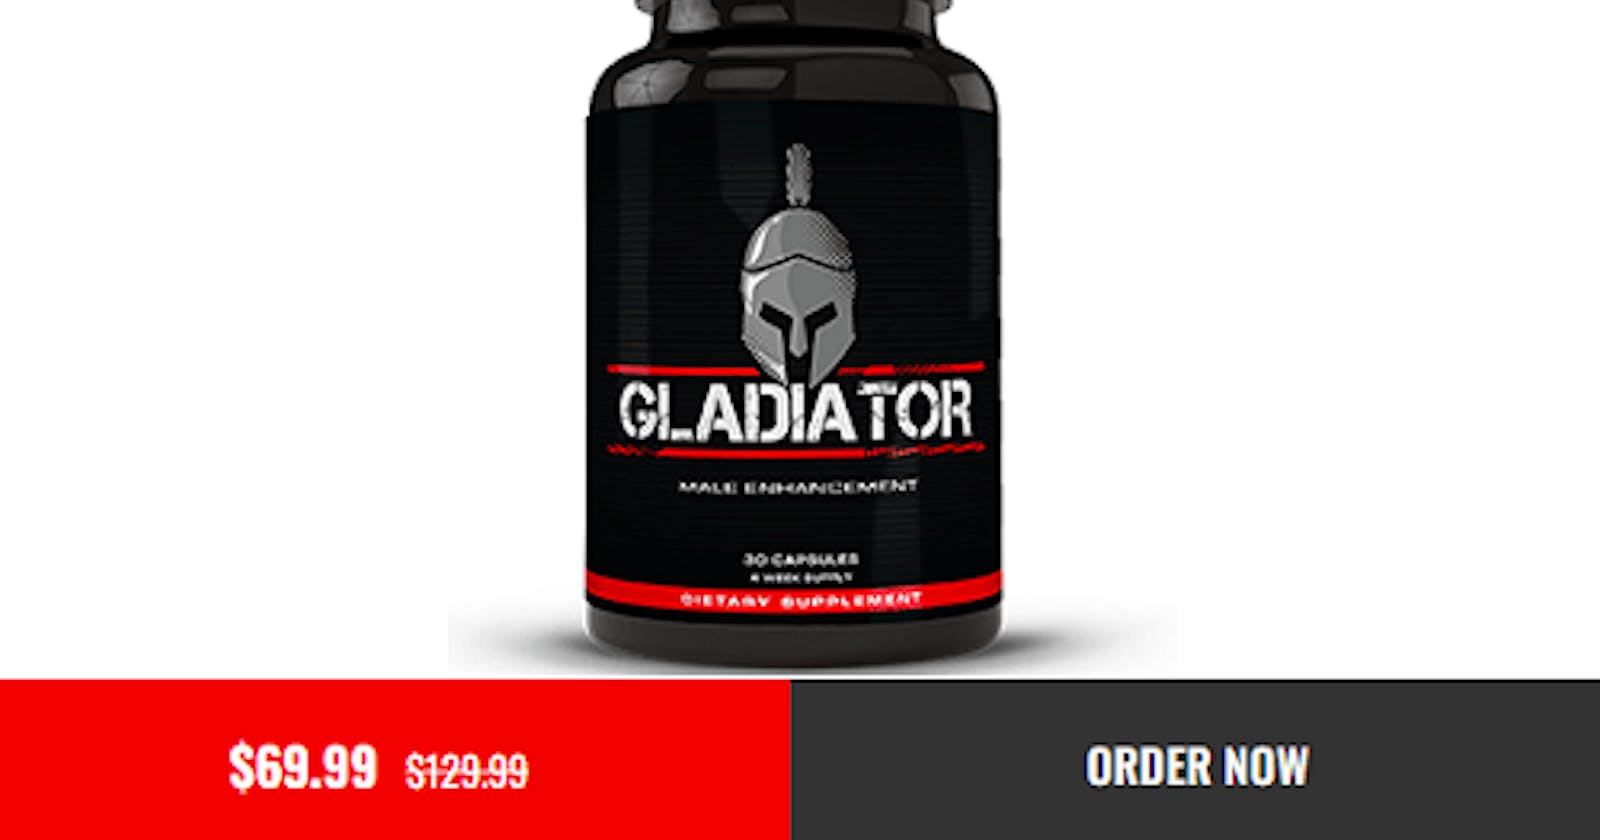 Gladiator Male Enhancement Pills *#1 SEX DRIVE BOOSTER* 100% Safe To Use Legit Or Scam?